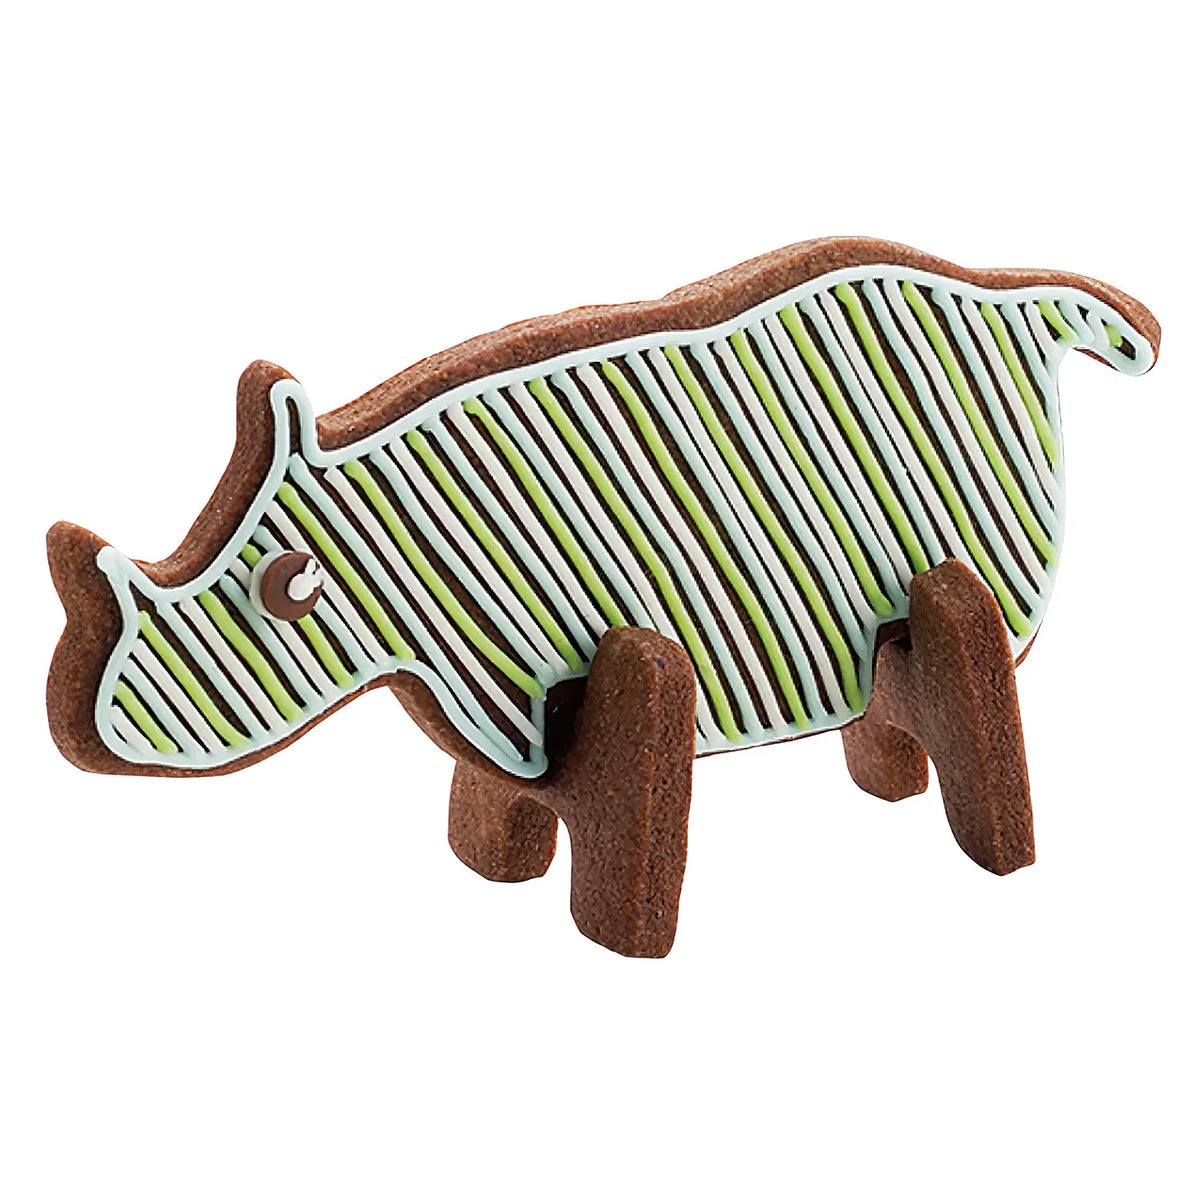 TIGERCROWN Cake Land Stainless Steel Cookie Cutter 3D Rhinoceros